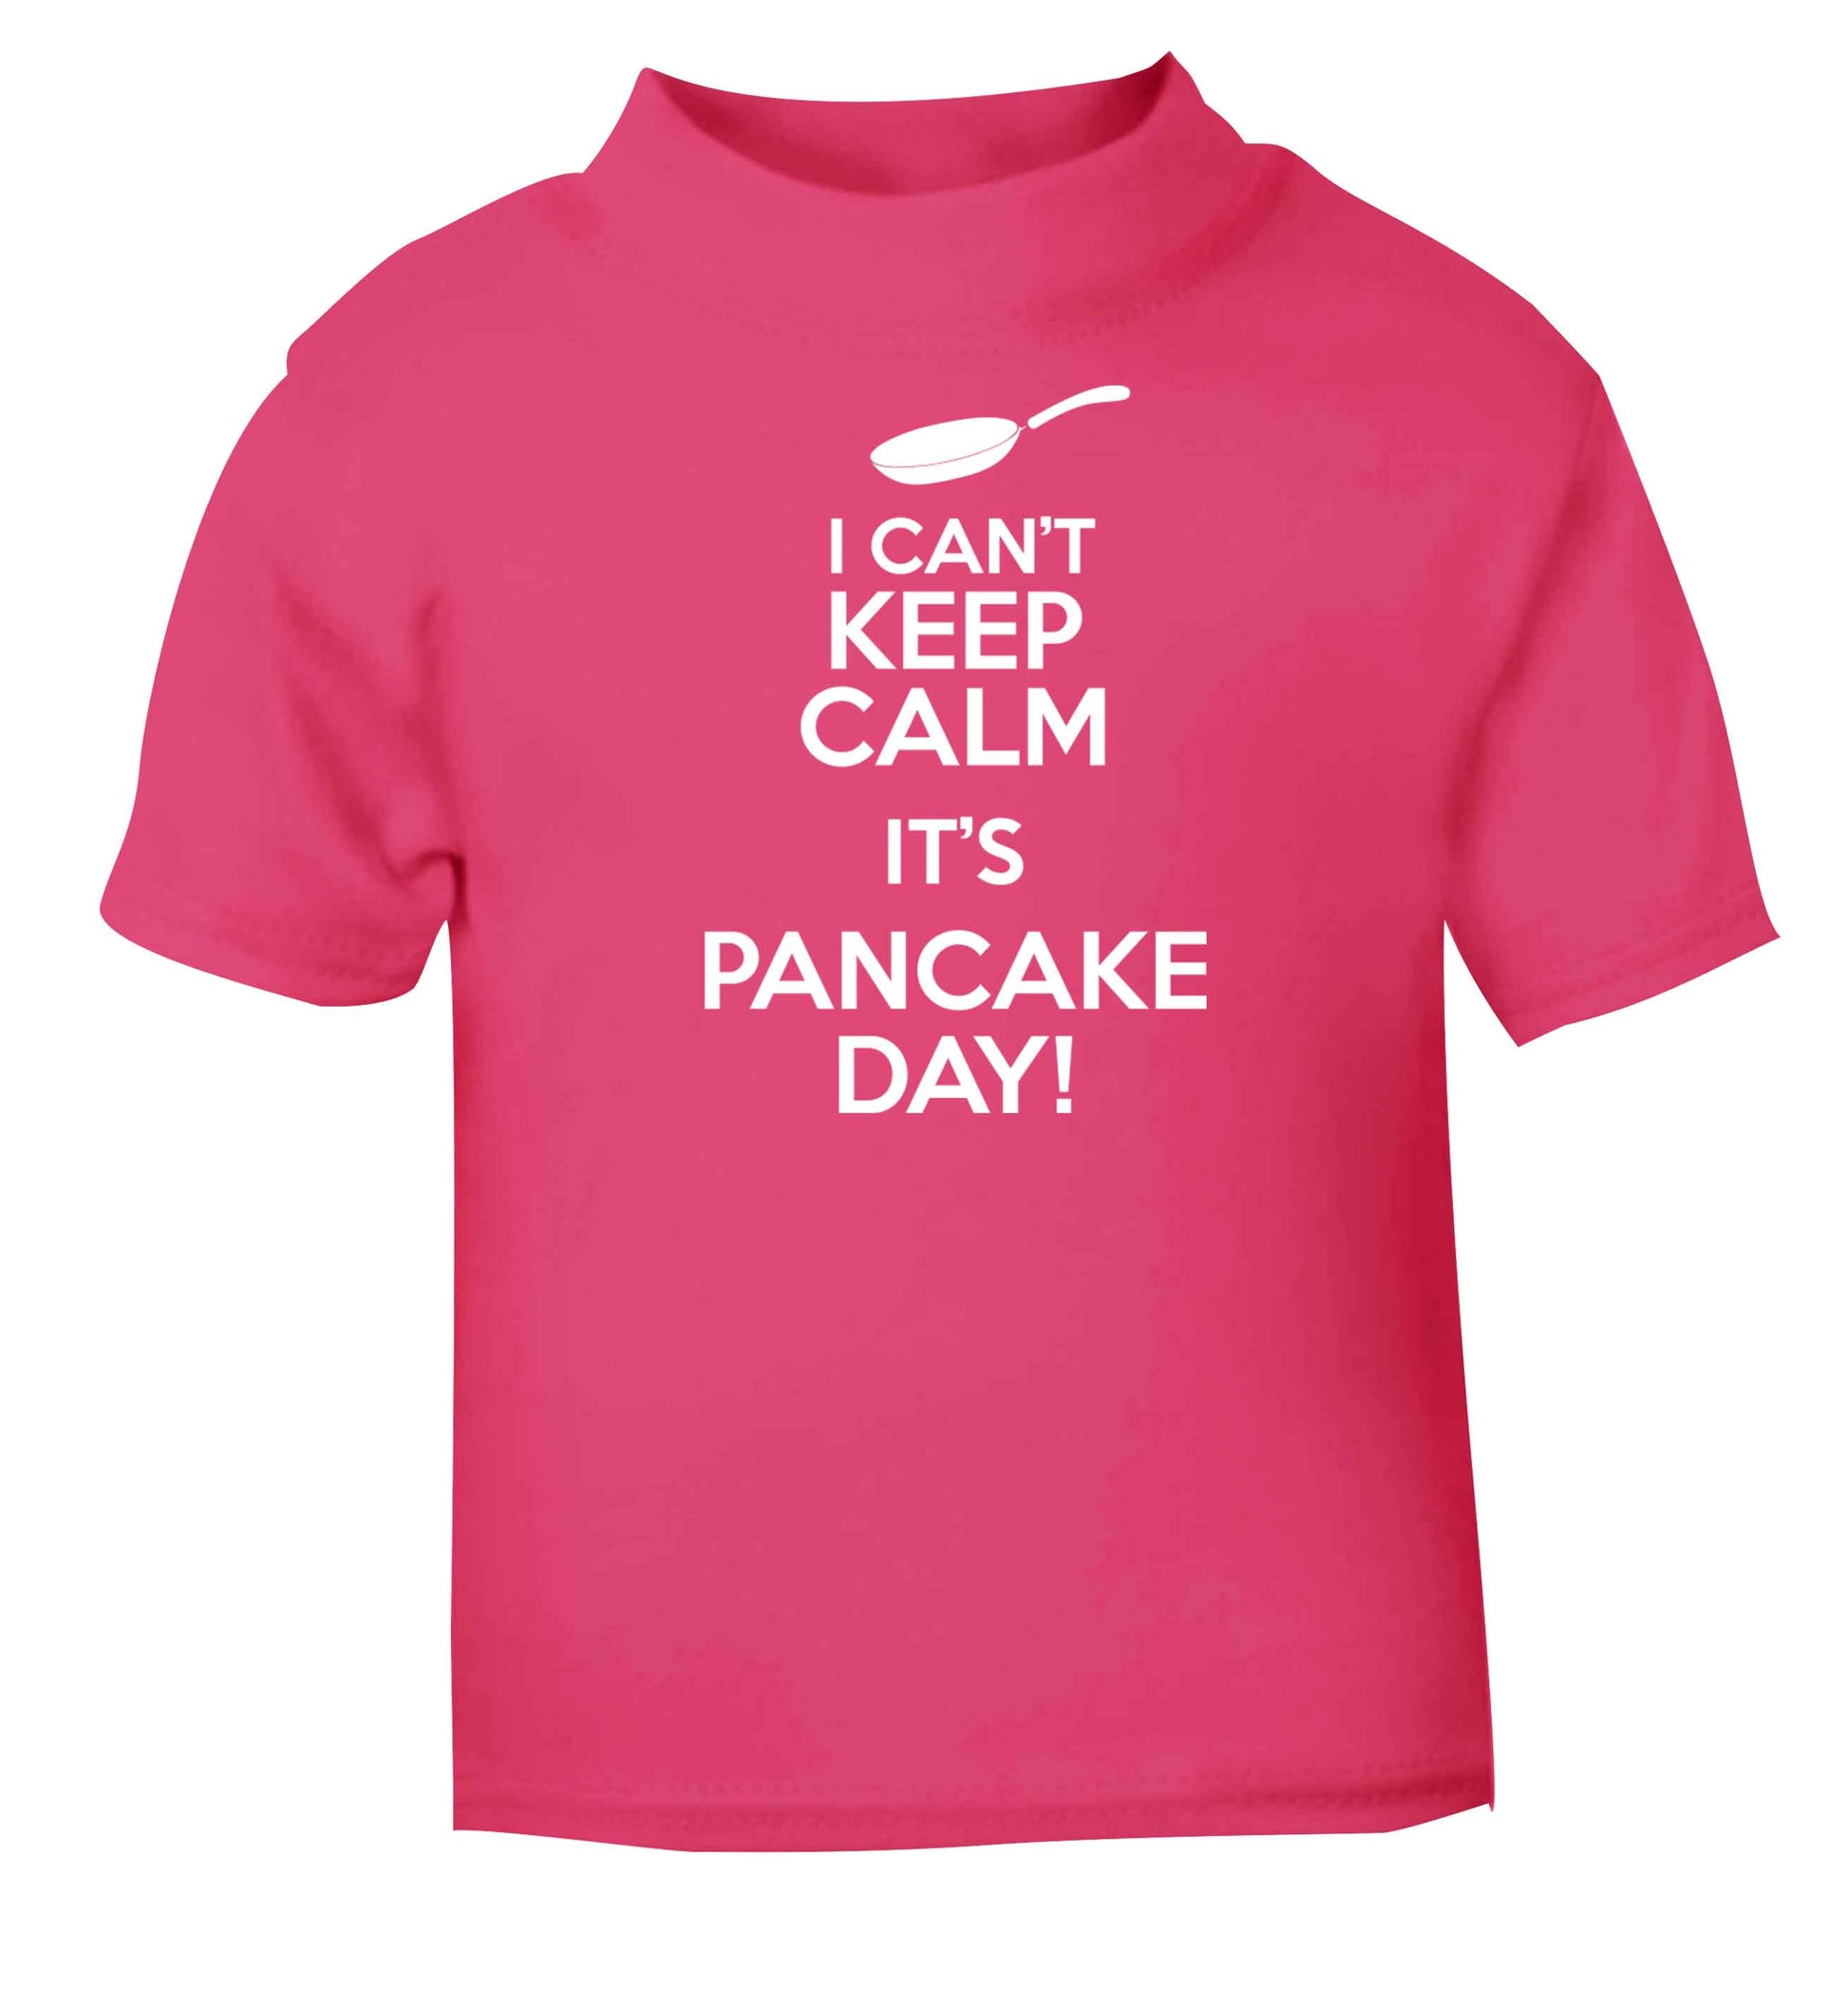 I can't keep calm it's pancake day! pink baby toddler Tshirt 2 Years